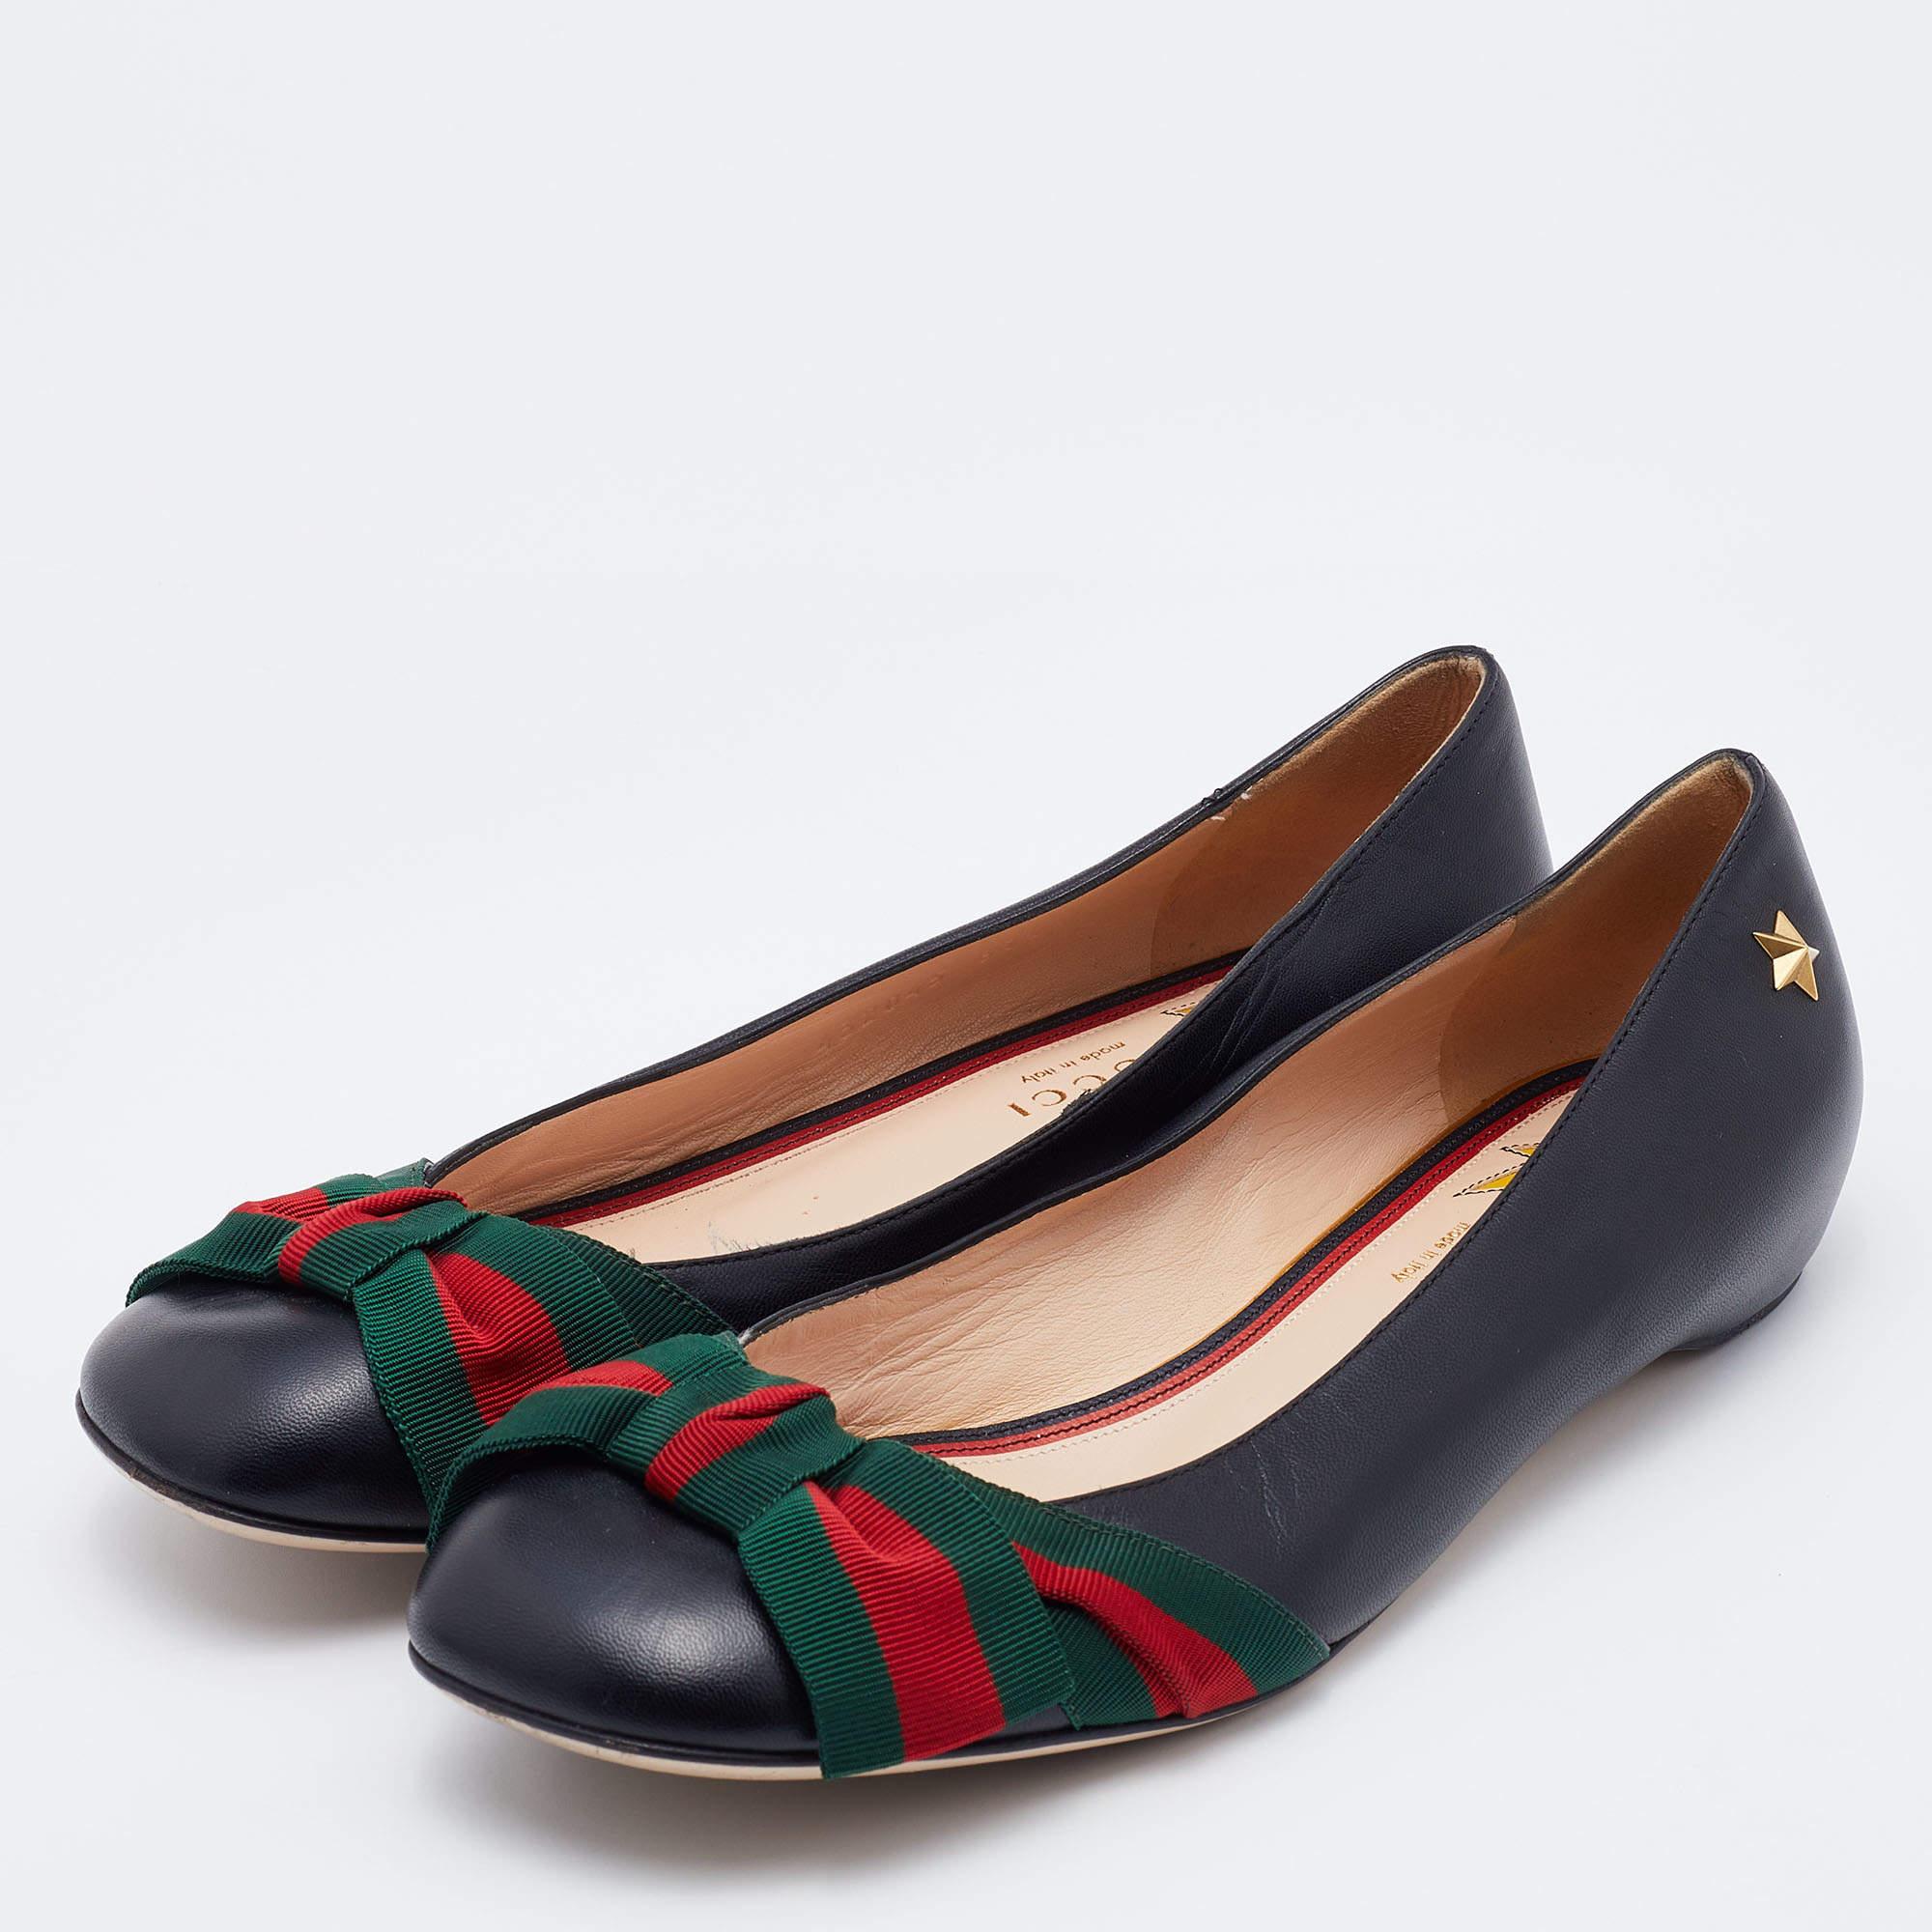 Gucci Black Leather Web Bow Ballet Flats Size 37.5 2